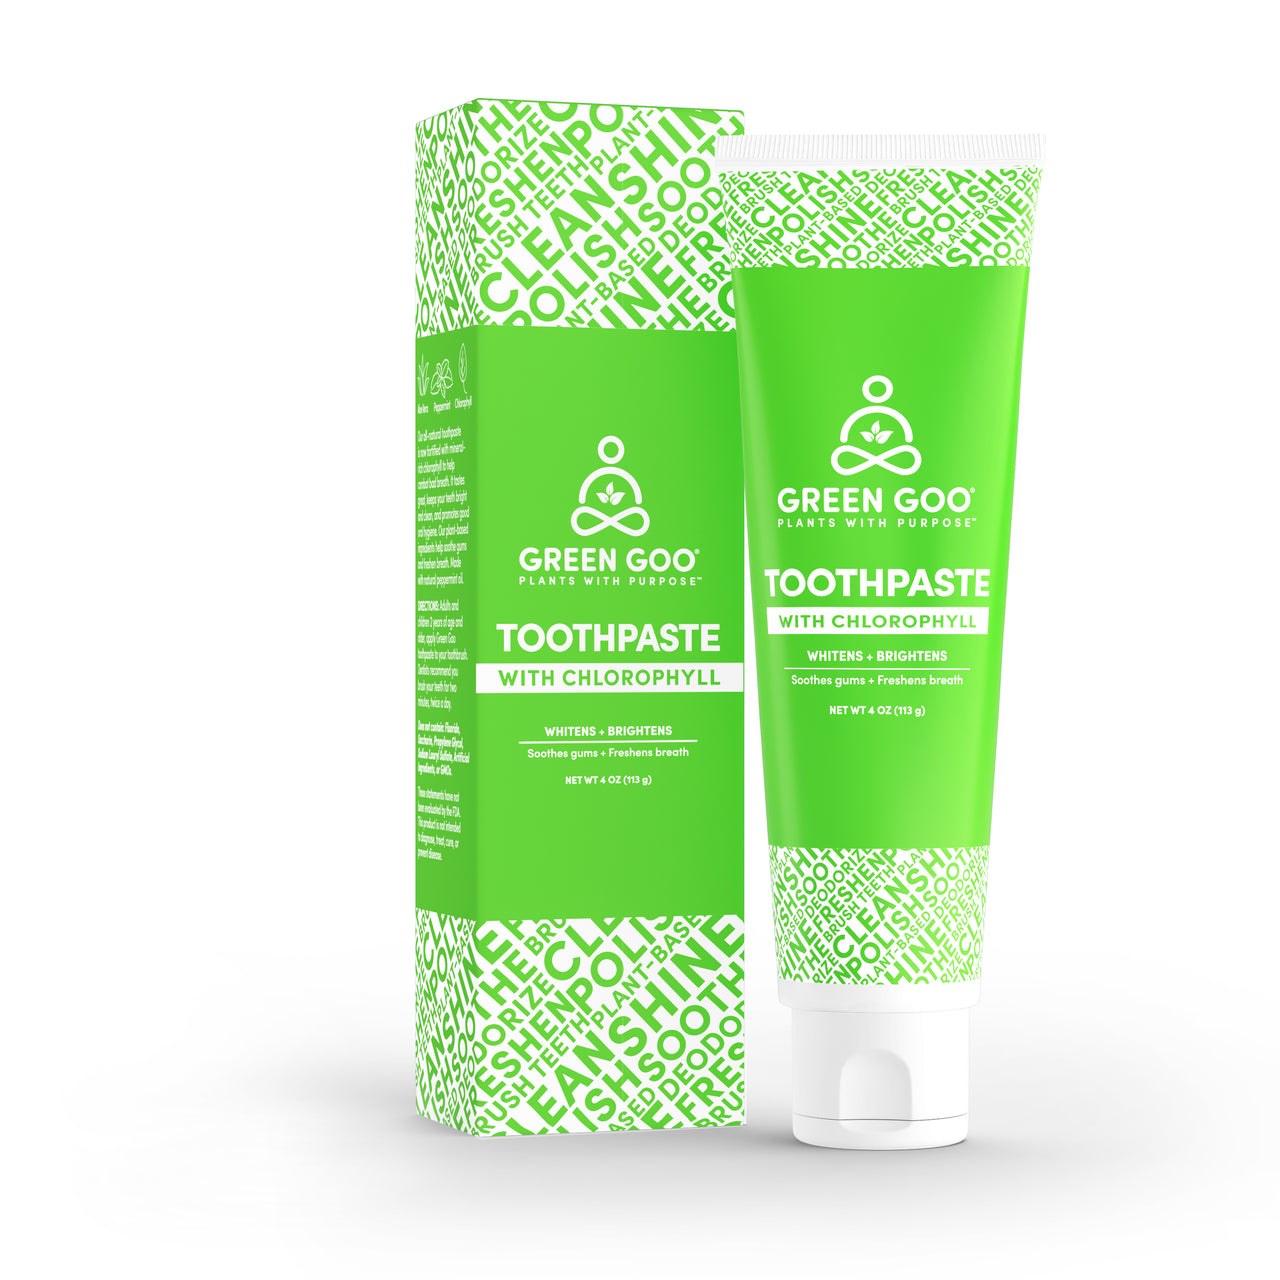 Toothpaste with Chlorophyll